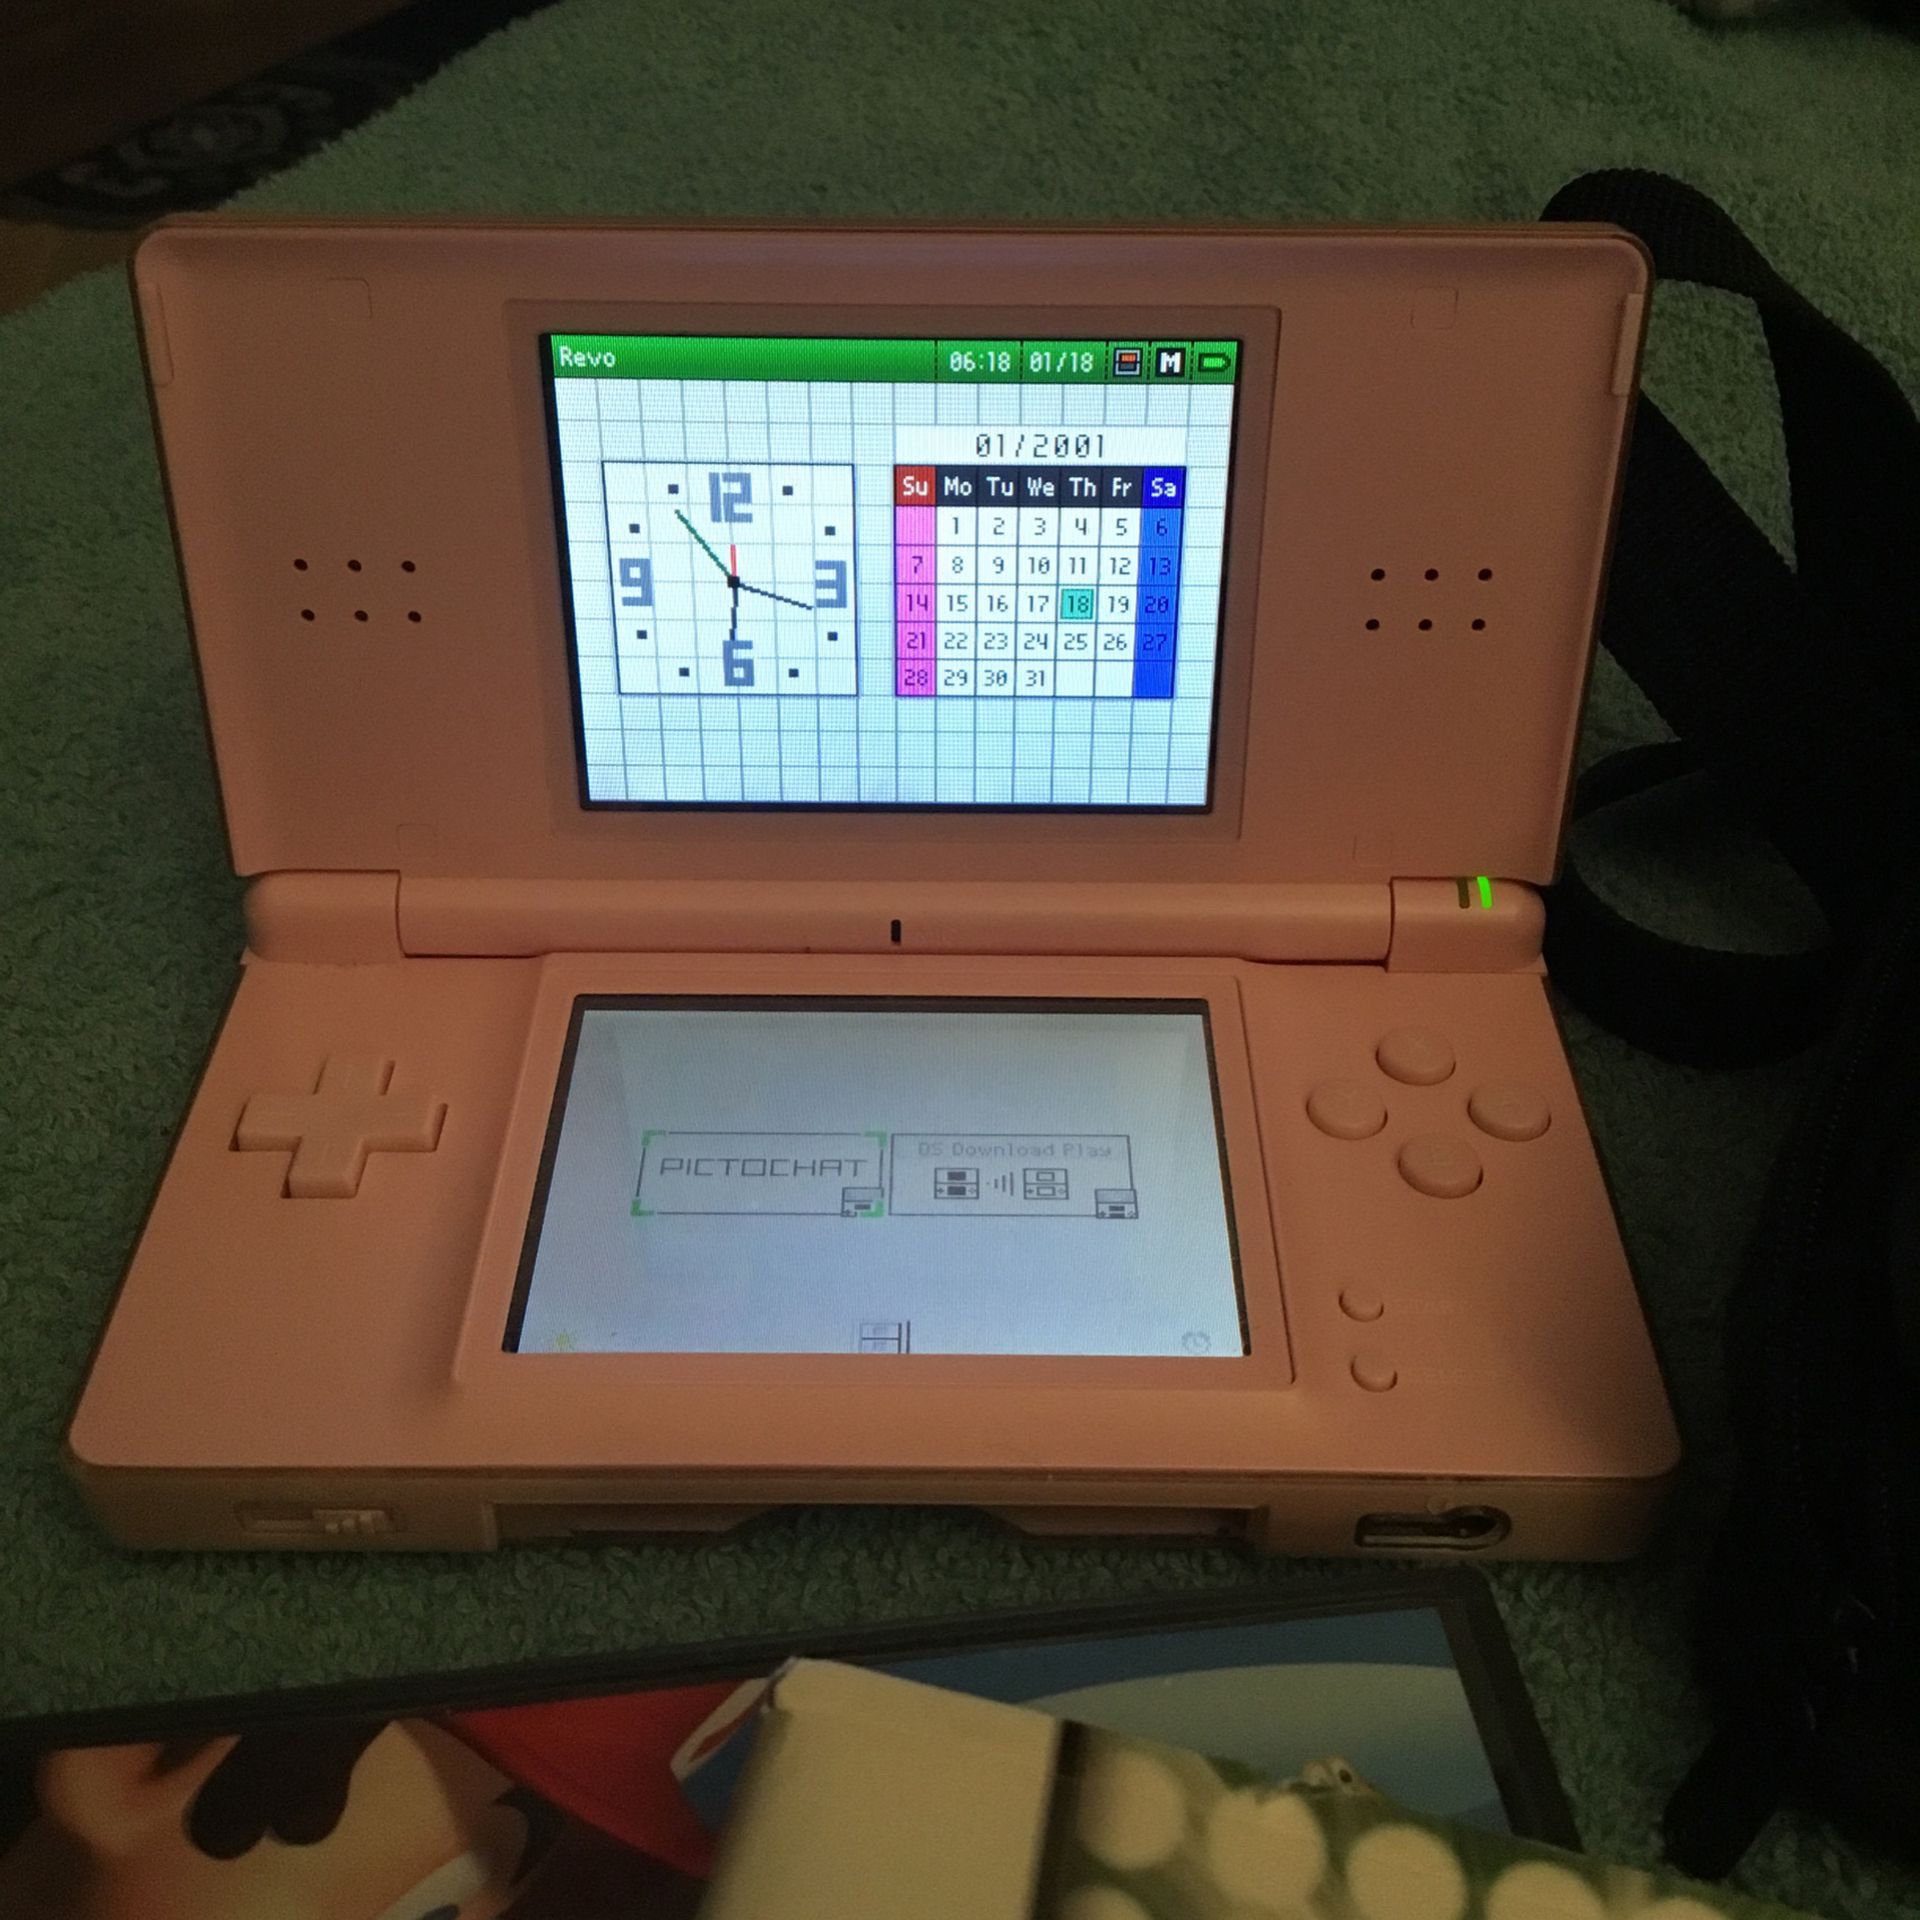 Nintendo DS - Lite Handheld - Console System - for; DS,DSL,DSI,GBA Games - Includes 5 Games - Works Great!